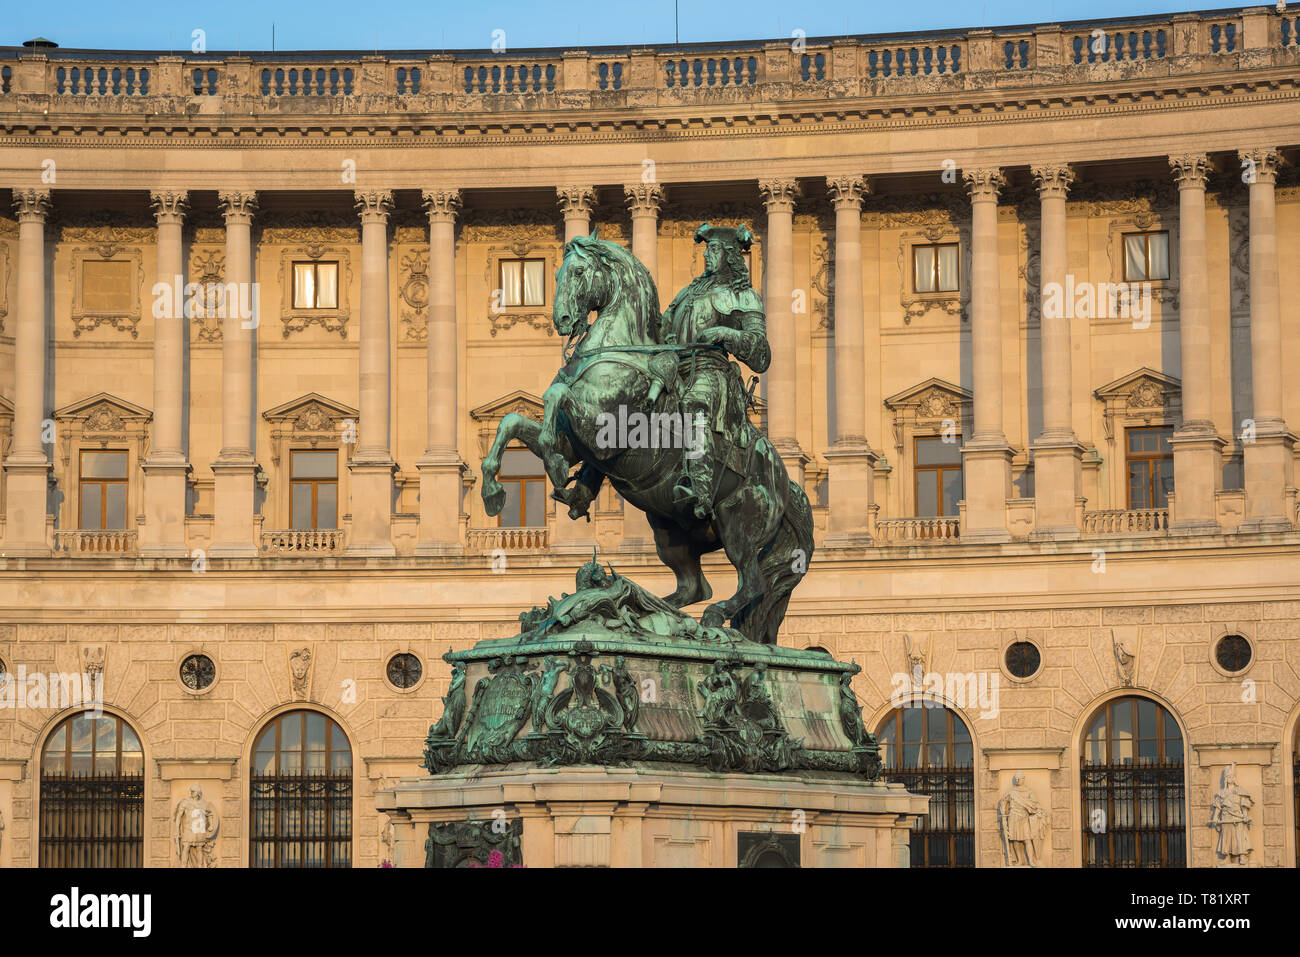 Hofburg Palace Vienna, view of the statue of Prince Eugene of Savoy sited against the backdrop of the Neue Burg building of the Hofburg Palace complex Stock Photo